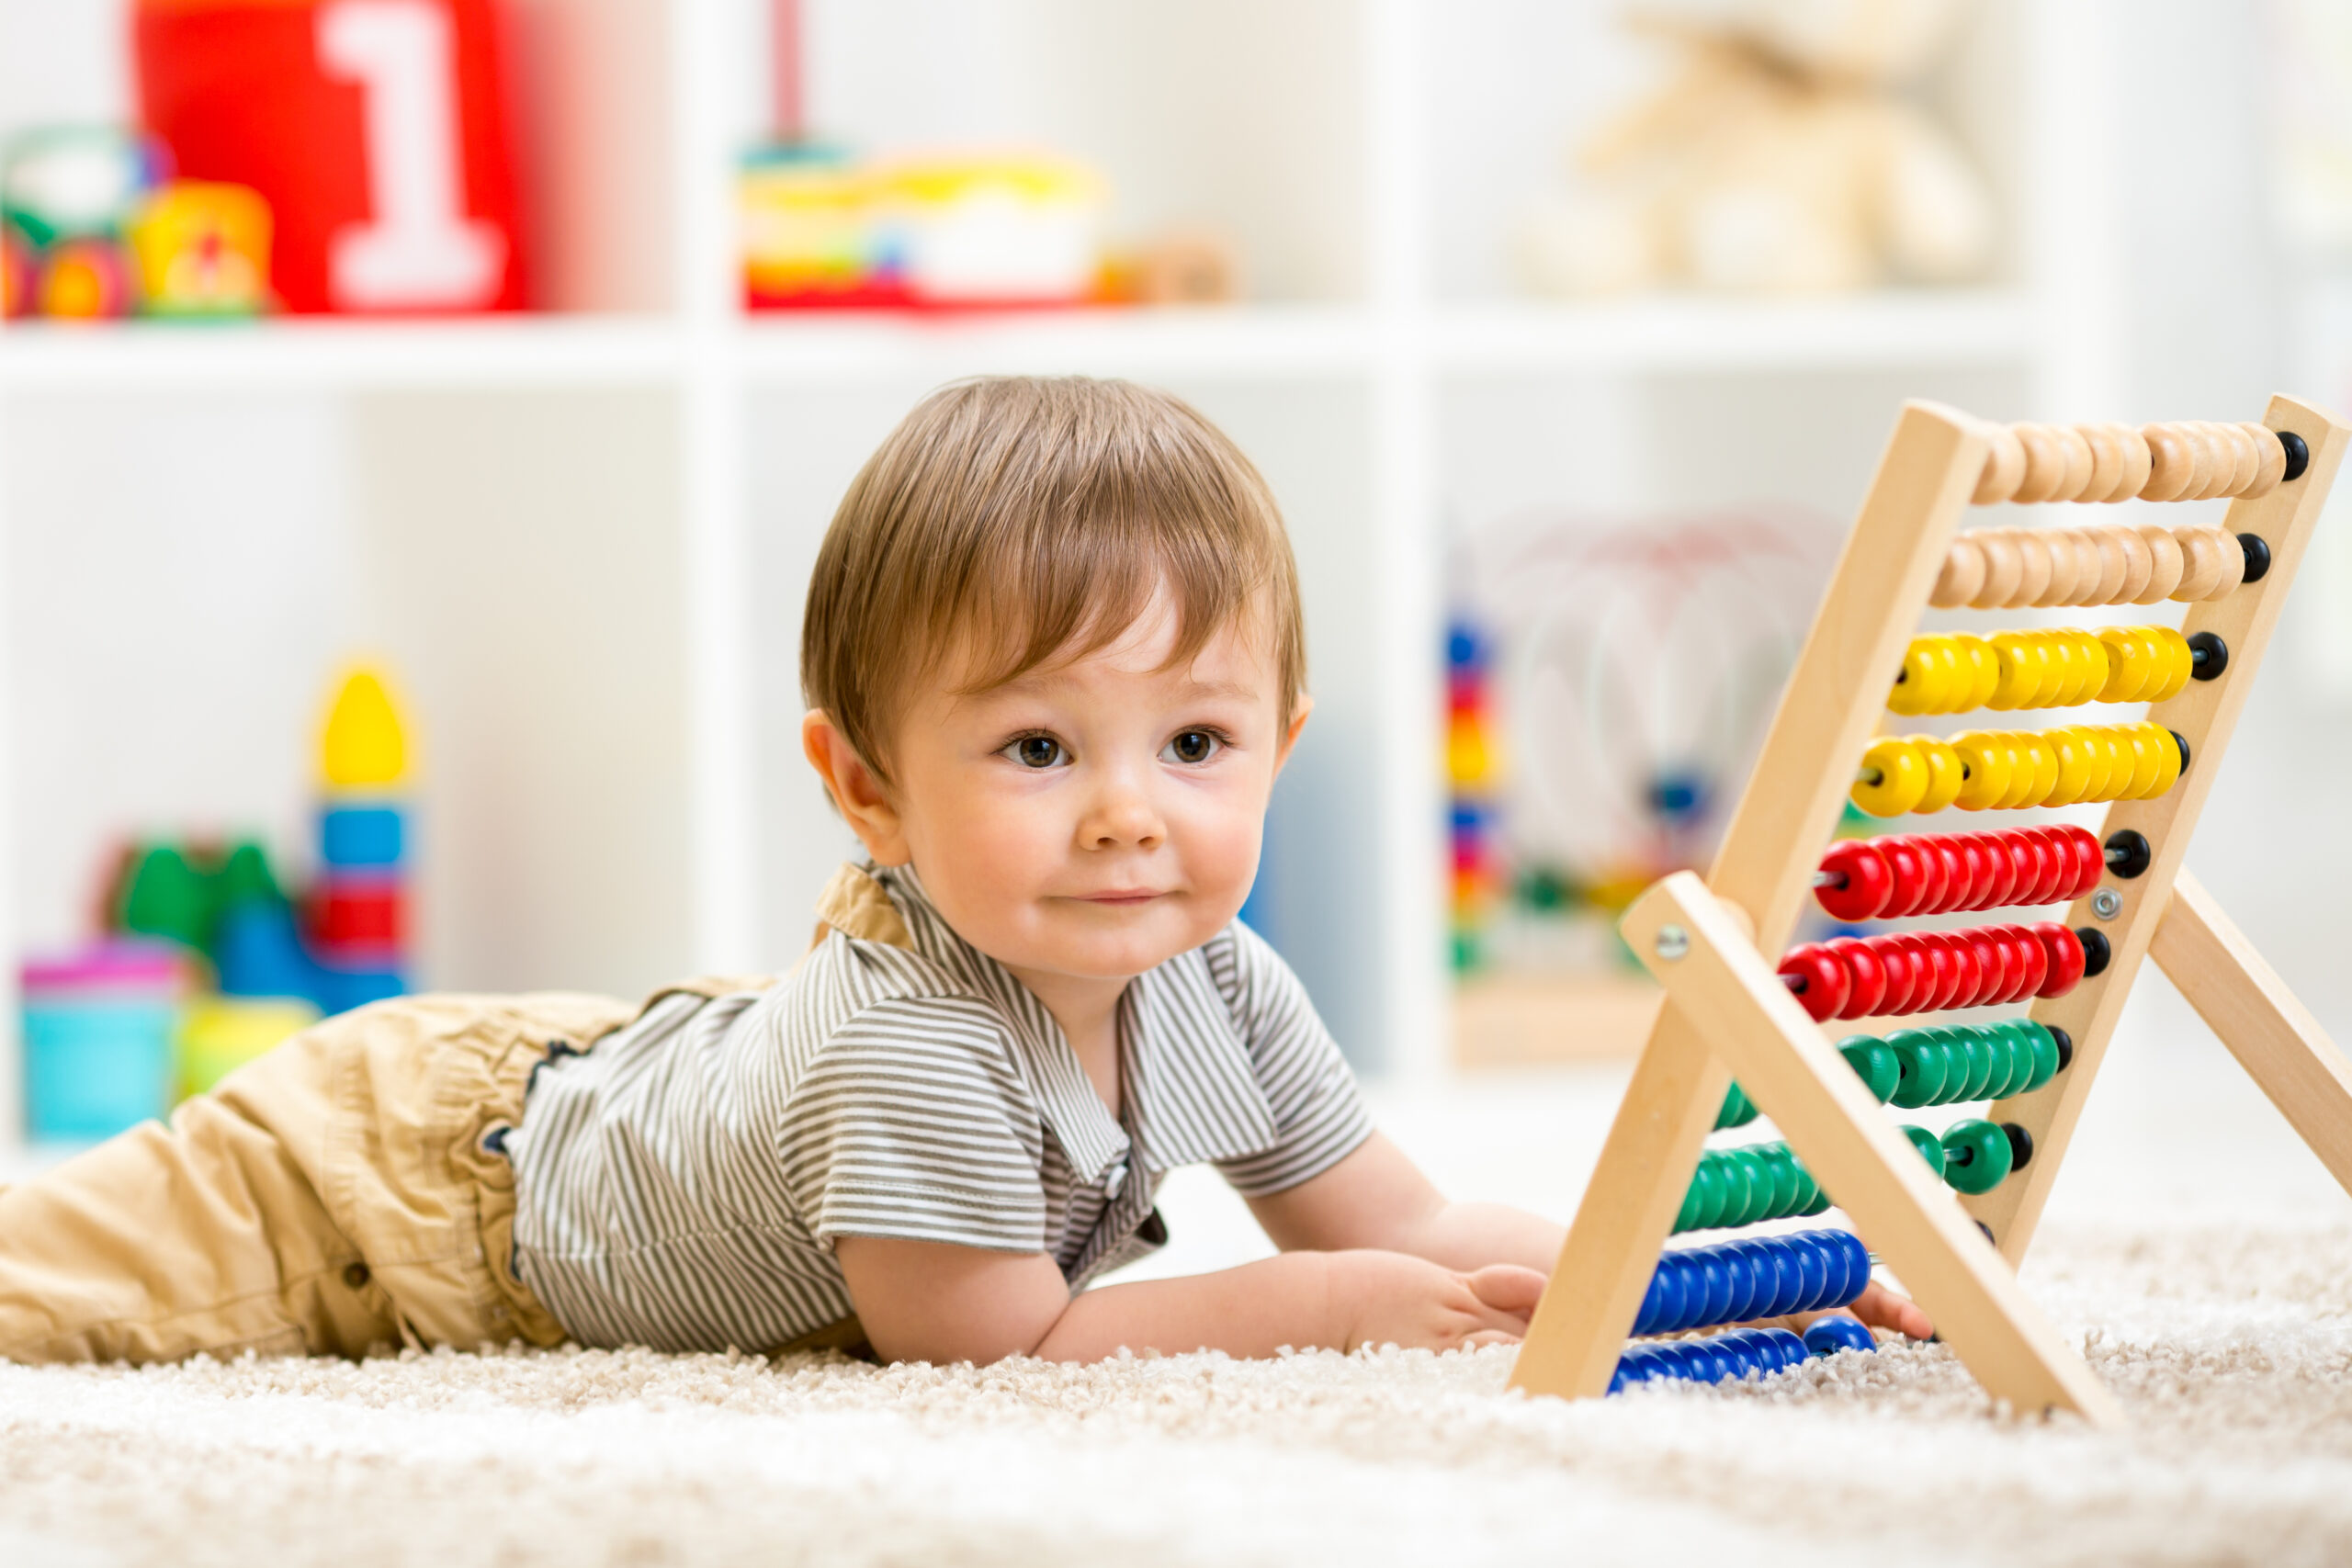 A baby is playing with an abacus in an early education center.